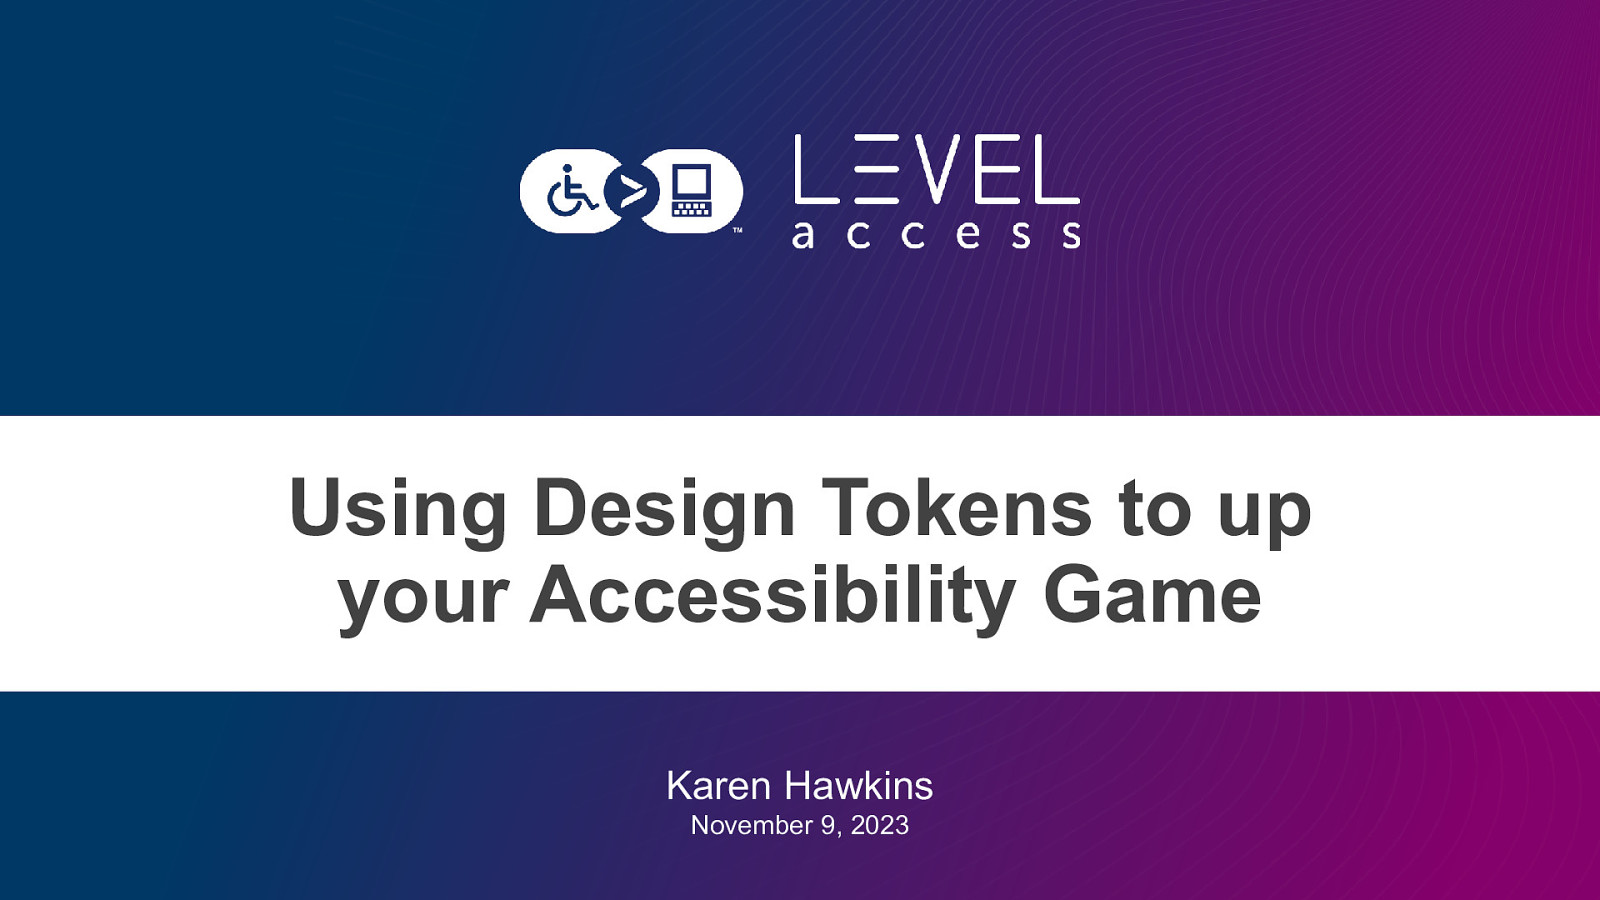 Using Design Tokens to up your Accessibility Game